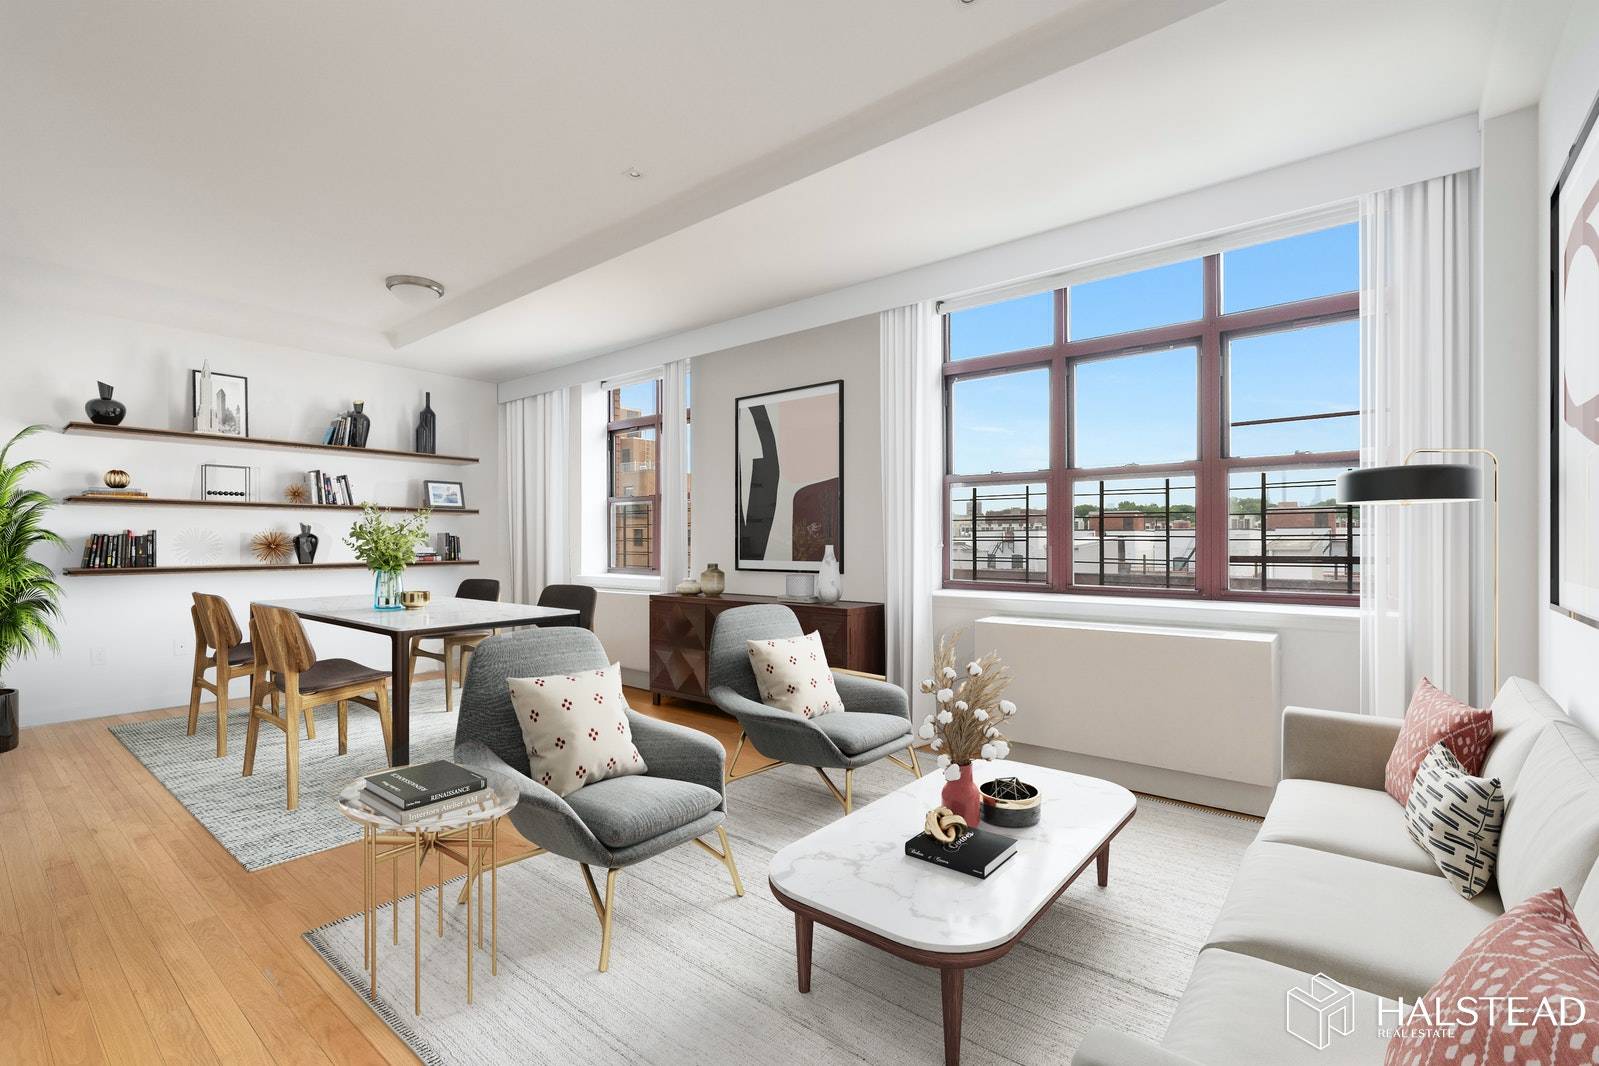 Impressive loft living in this newly renovated Convertible 2 BR, 2 BA Harlem duplex with a chic downtown vibe that offers an abundance of natural light and coveted terrace space ...